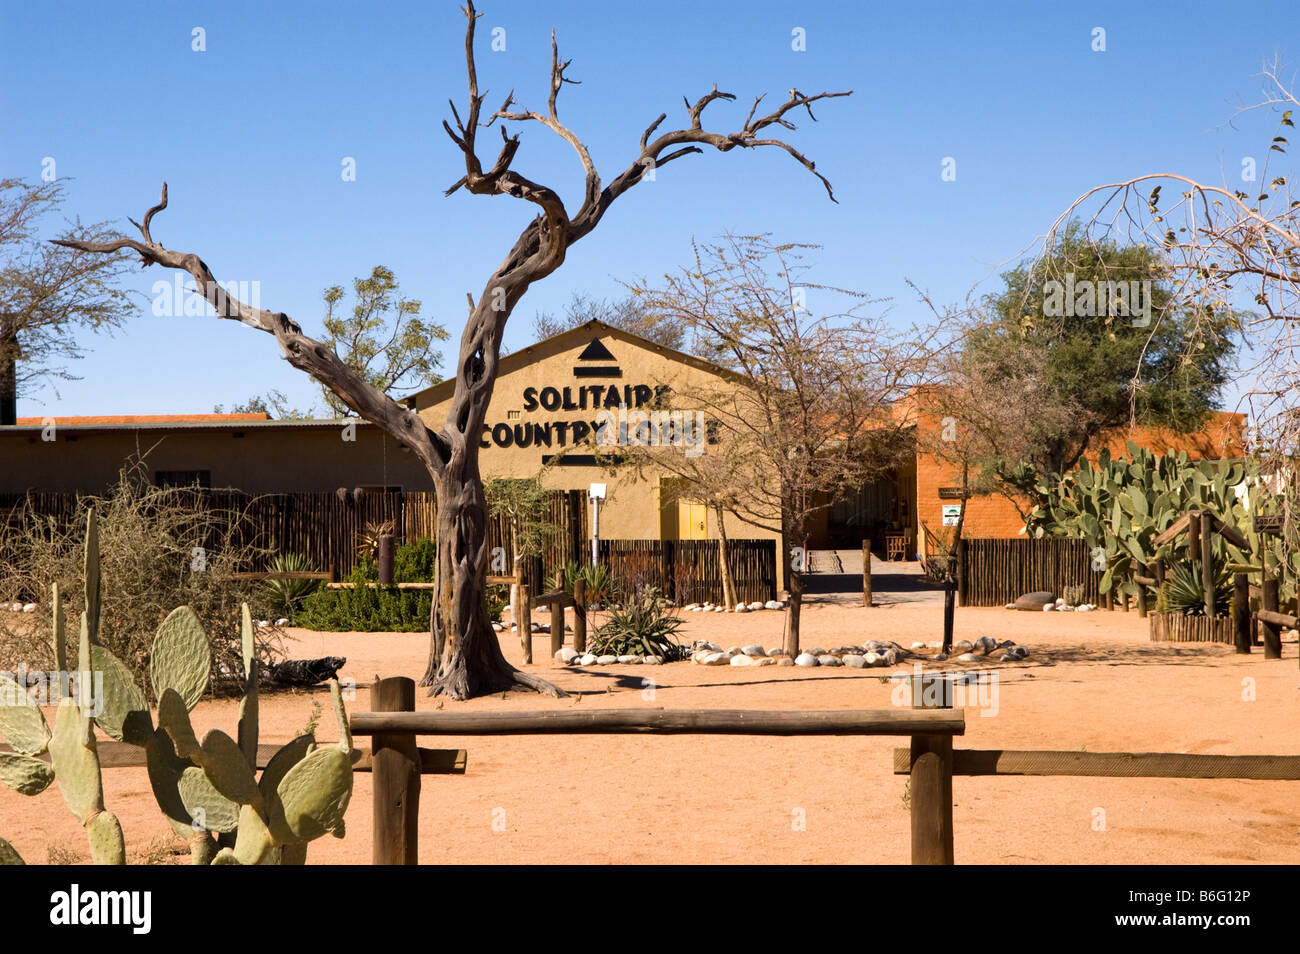 Die Solitaire Country Lodge, Hotelunterkunft in Solitaire, Namibia Stockfoto